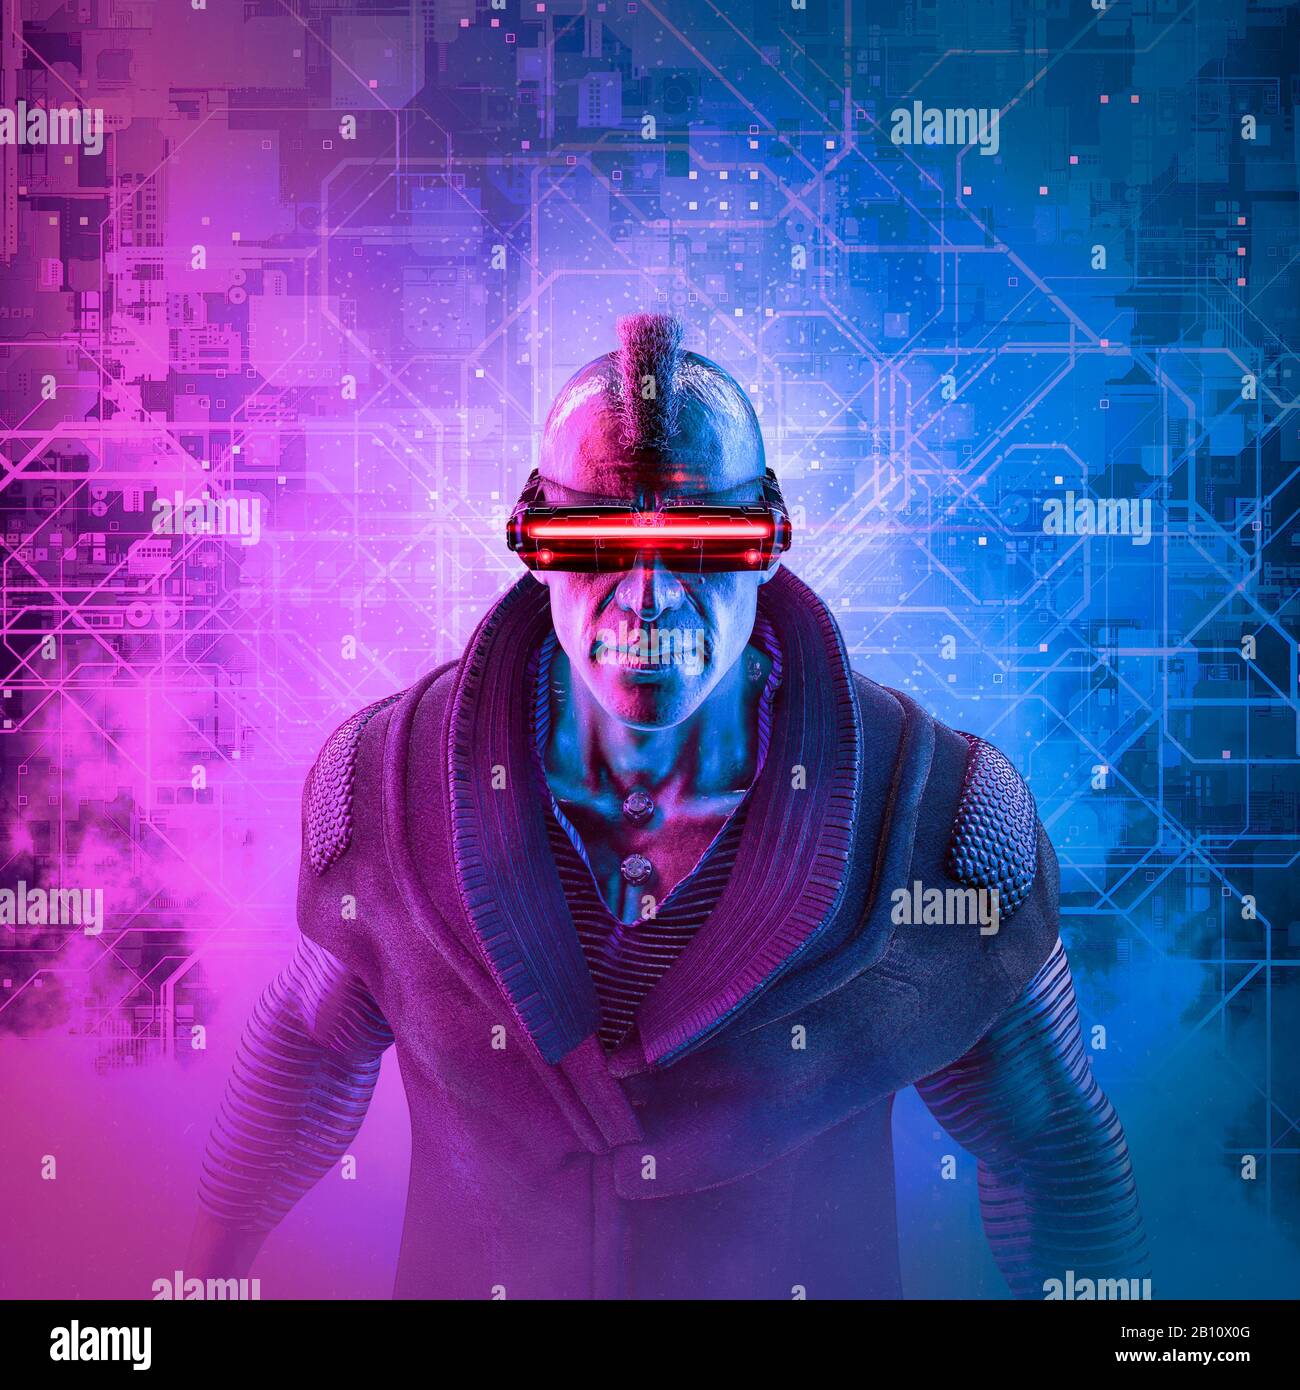 Cyberpunk mohawk man / 3D illustration of male science fiction character wearing futuristic glasses on abstract technology background Stock Photo